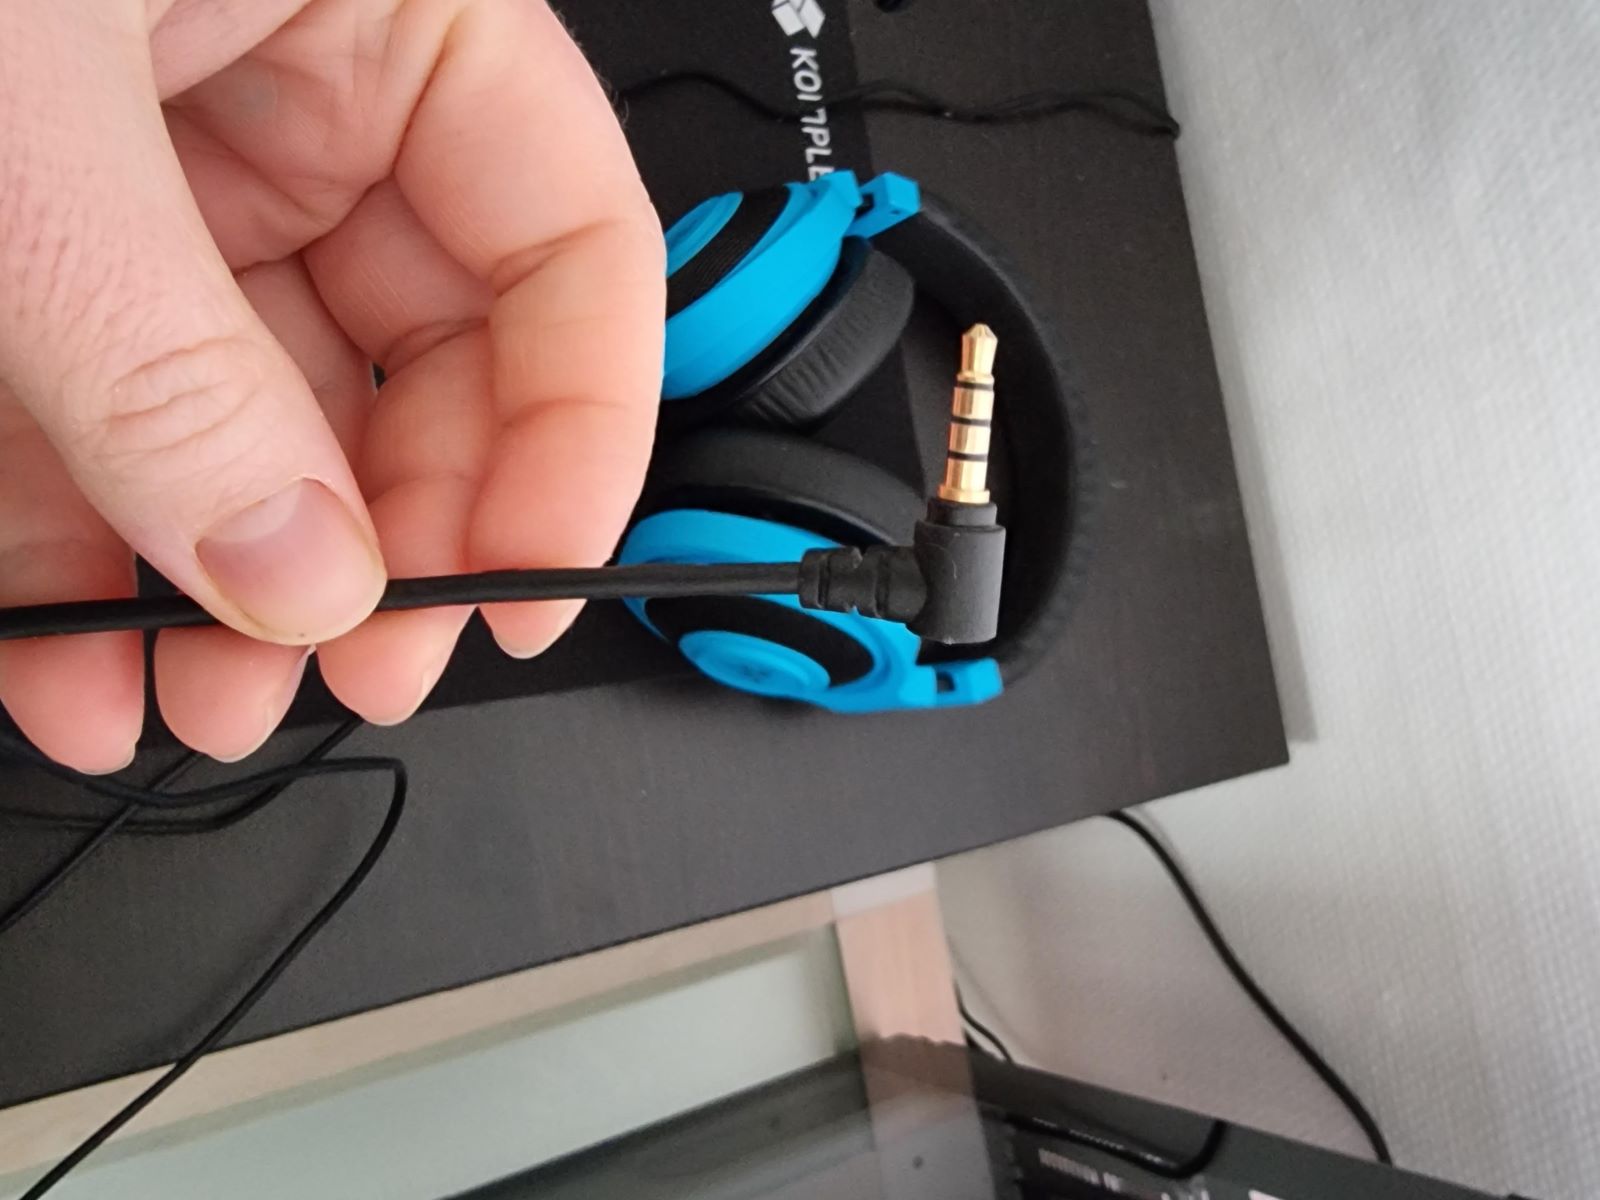 Connecting A Single-Jack Headset With Mic To PC